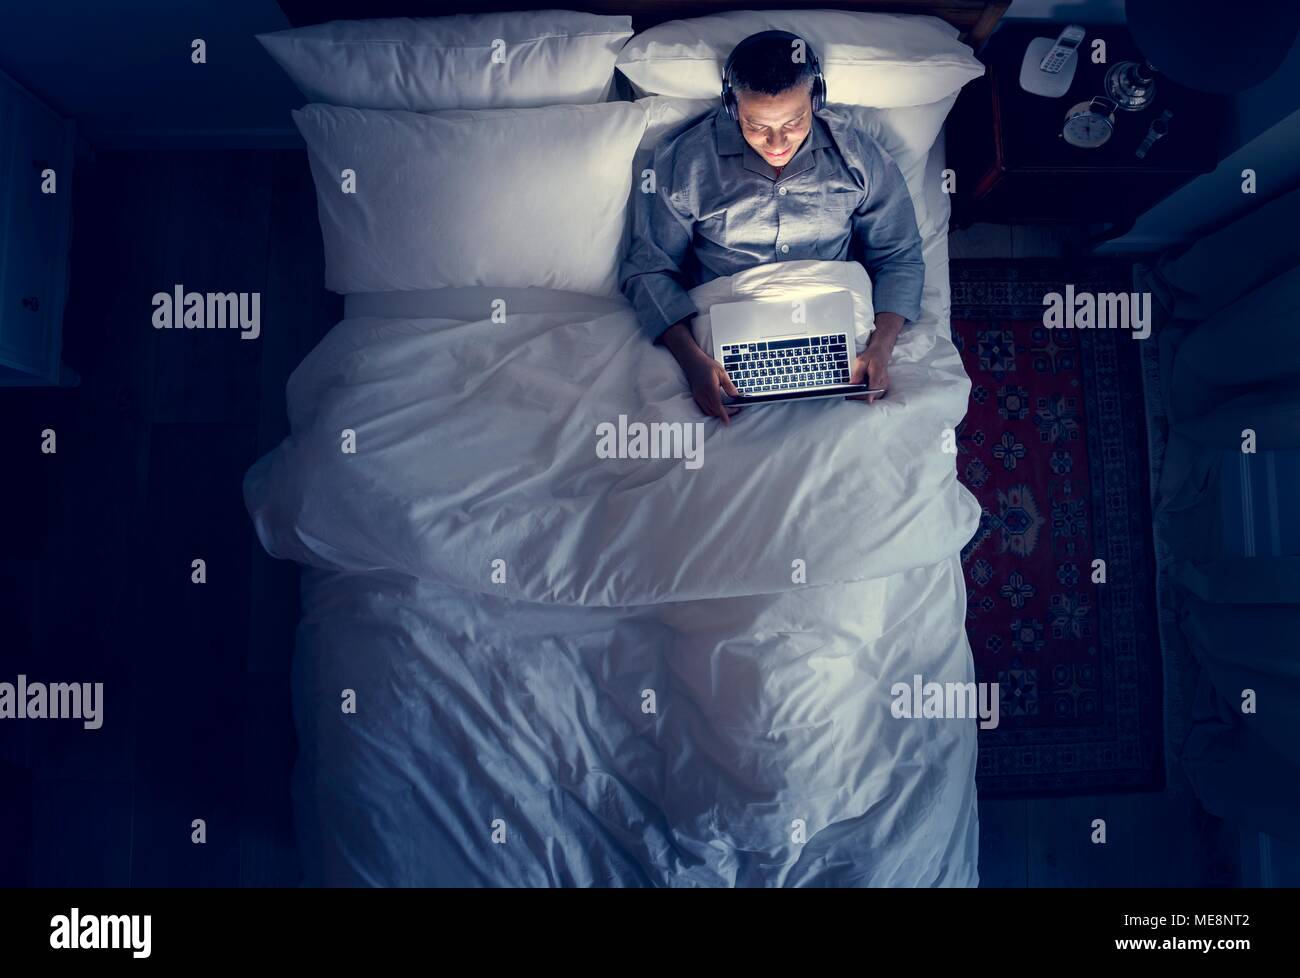 Man on bed using his laptop and a headphone Stock Photo